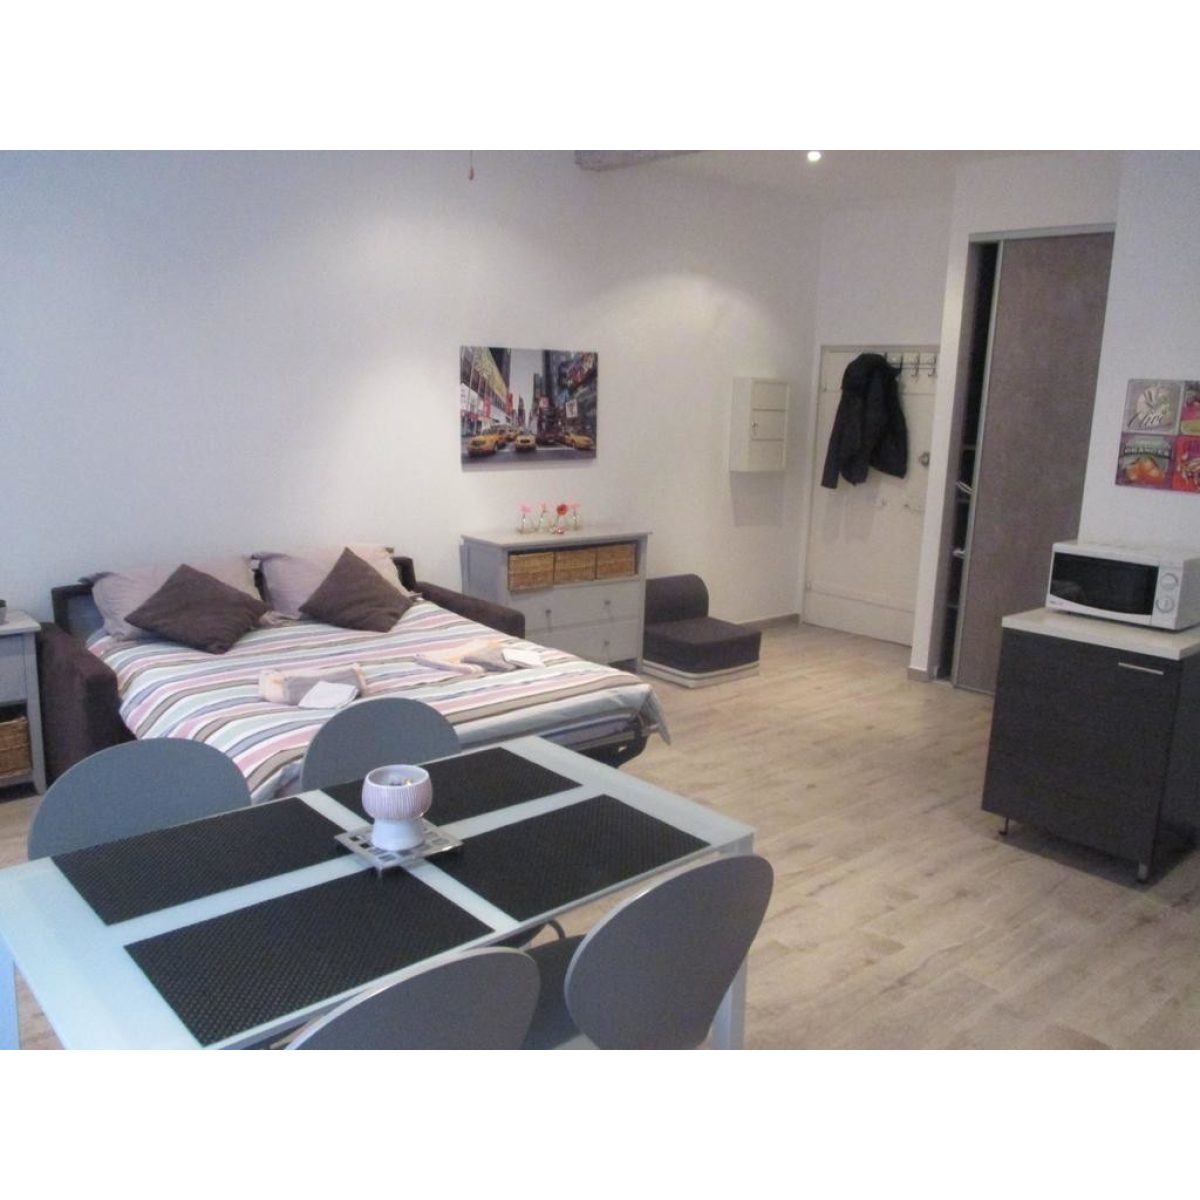 Dazzling 2 bedroom apartment in Zagreb for rent (Students only) | Zagreb apartment for rent 19